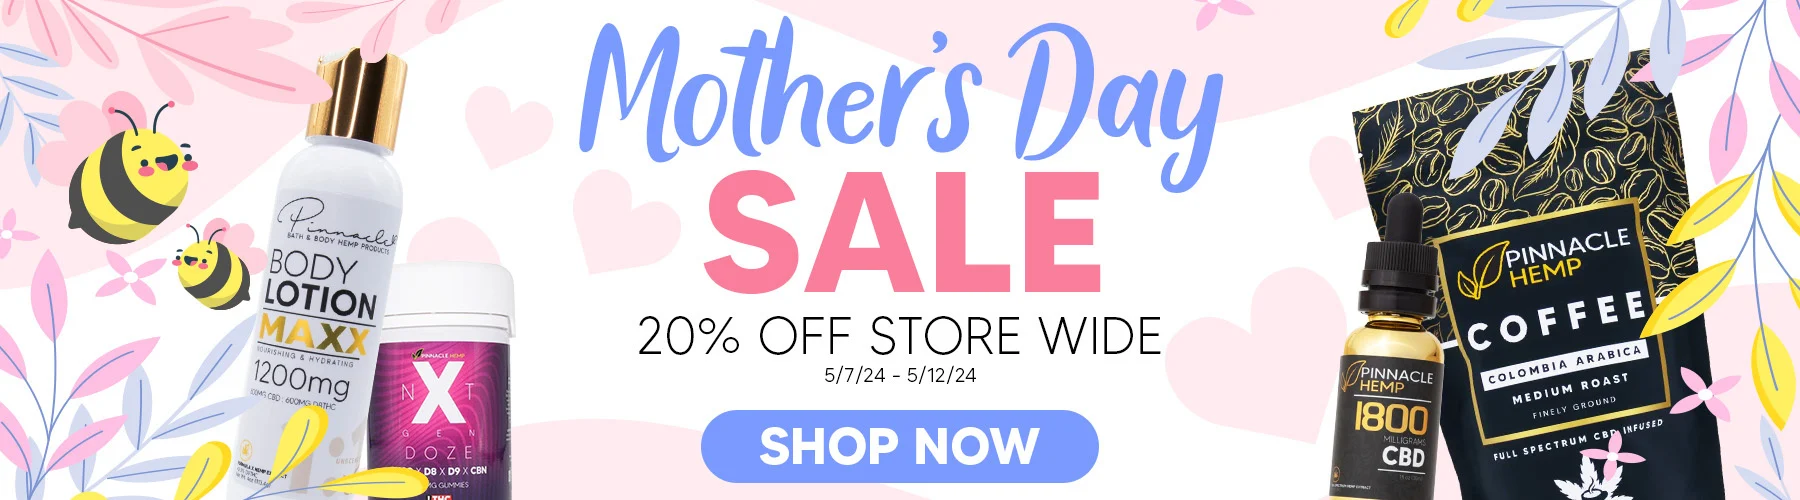 Pinnacle Hemp Mothers Day Category banner